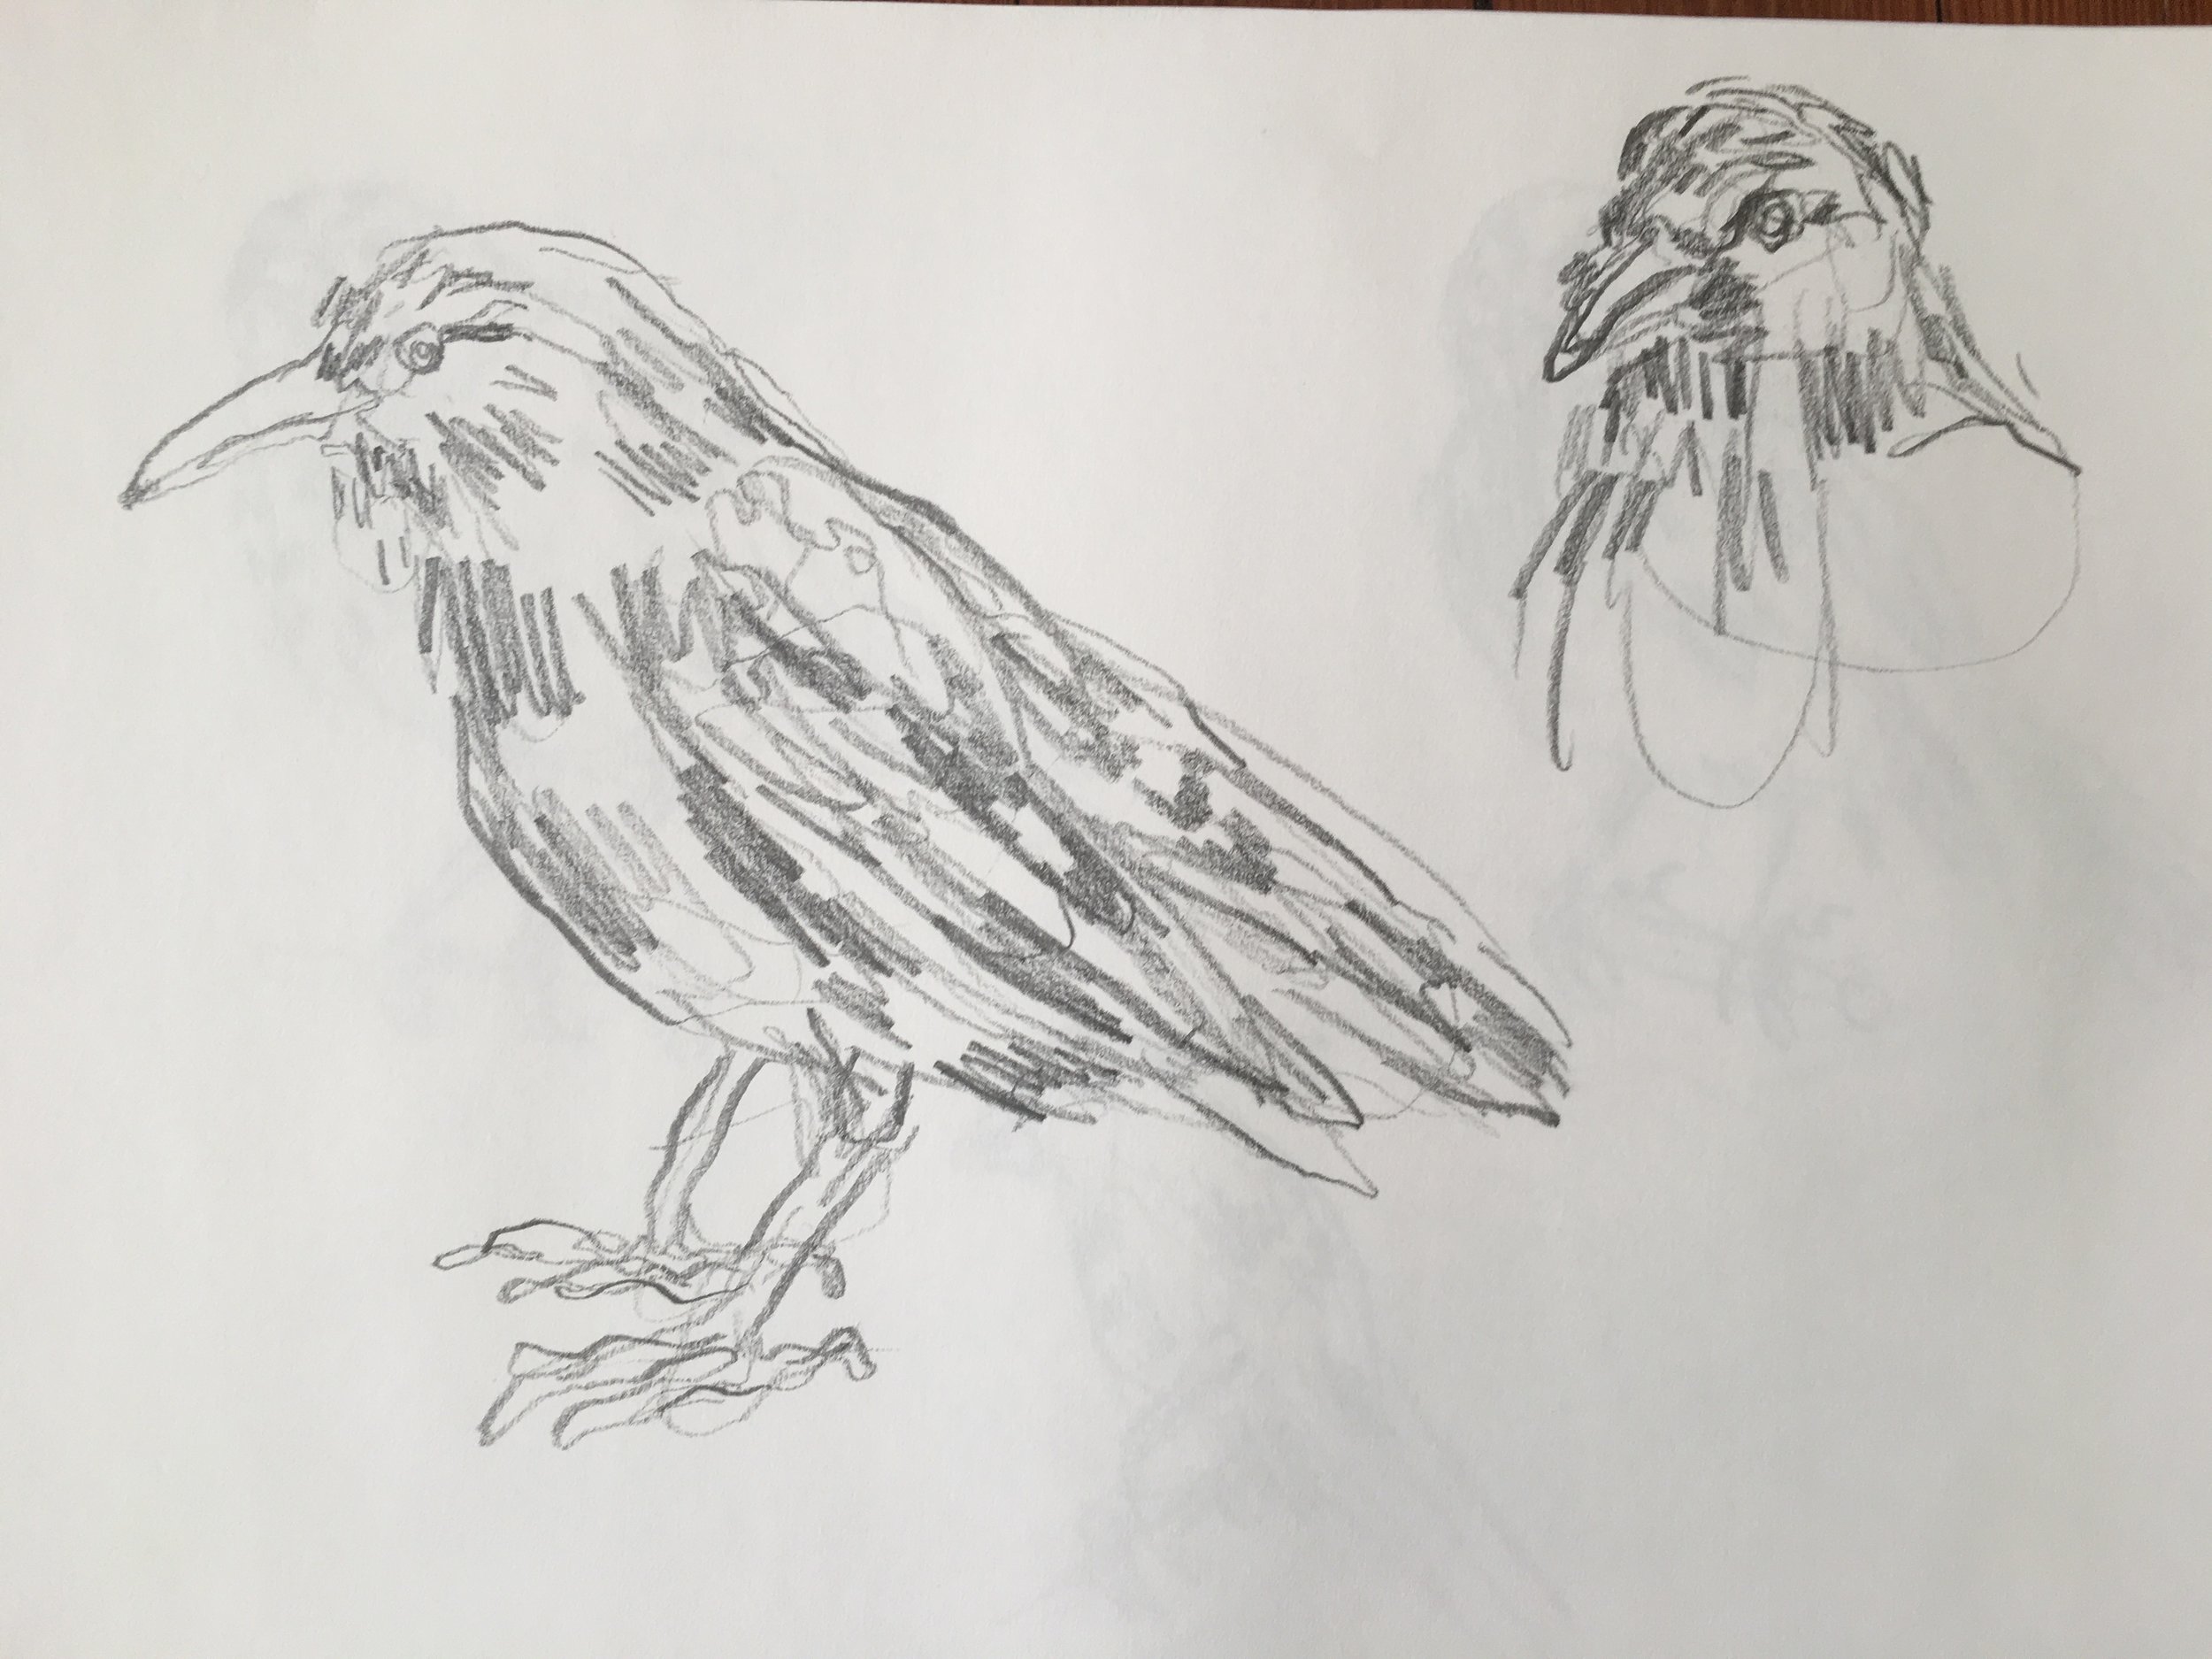 Sparrow studies / Yale Peabody Museum, New Haven CT